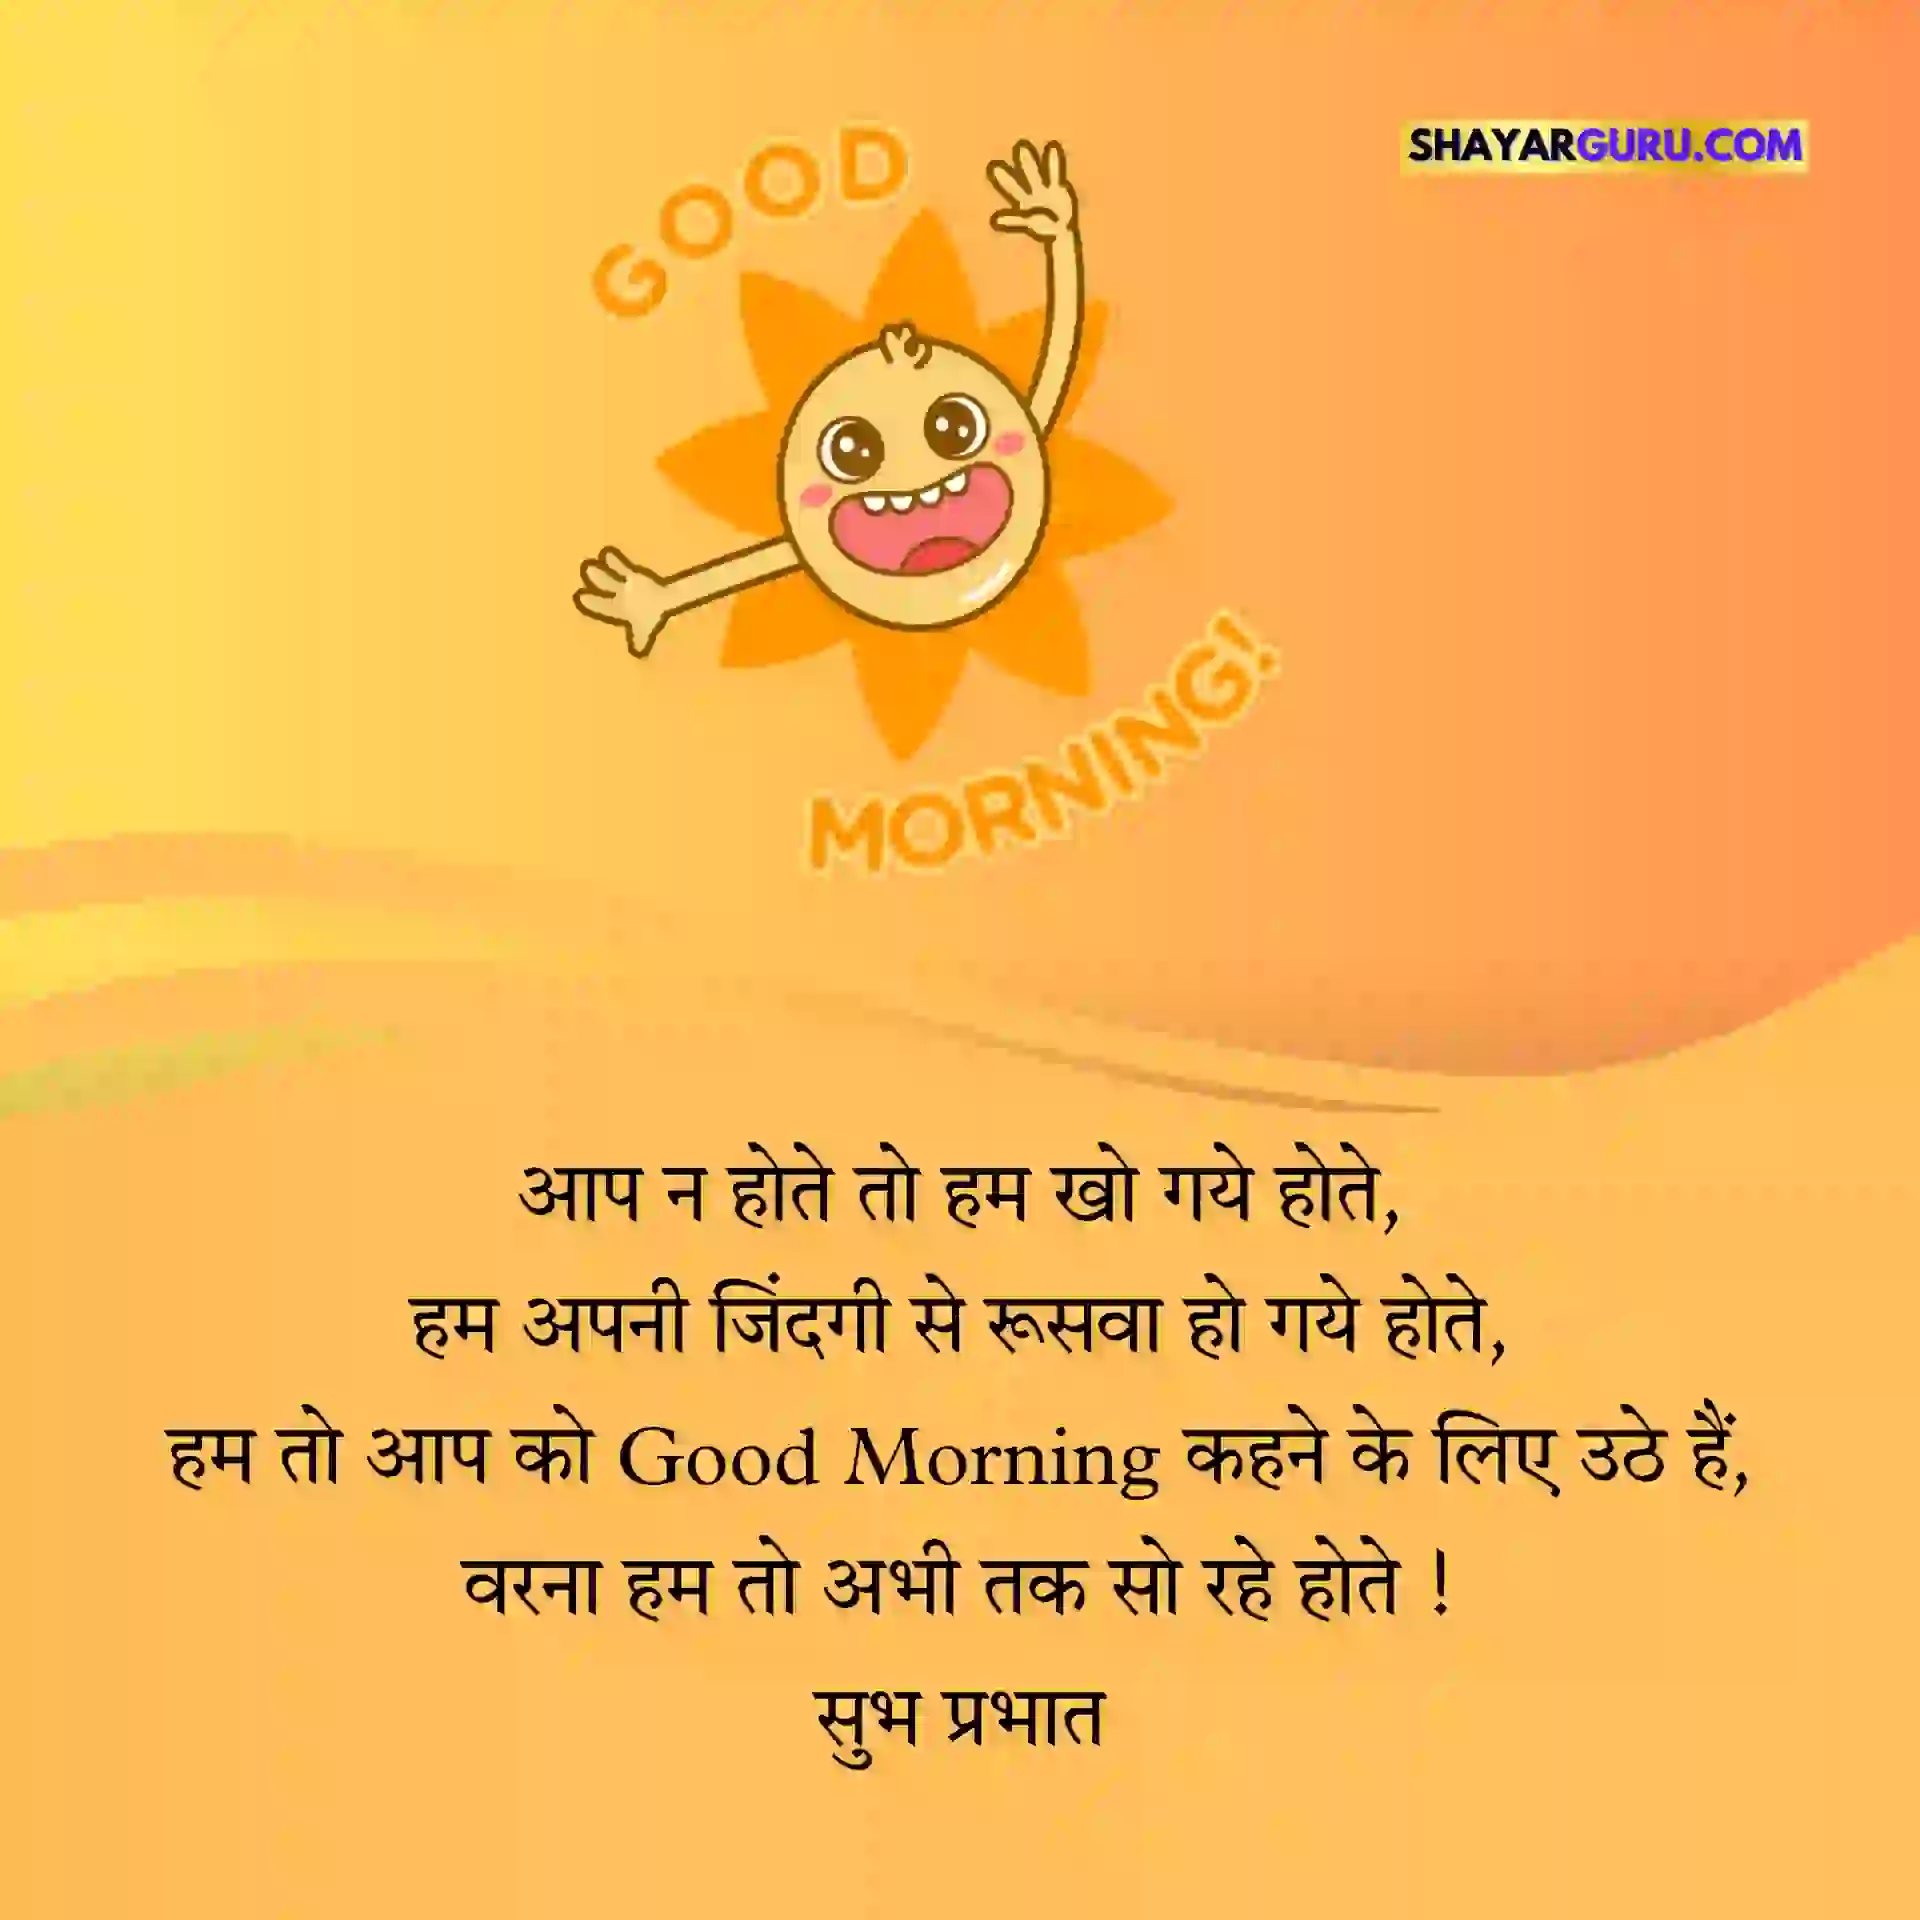 Good morning messages in hindi